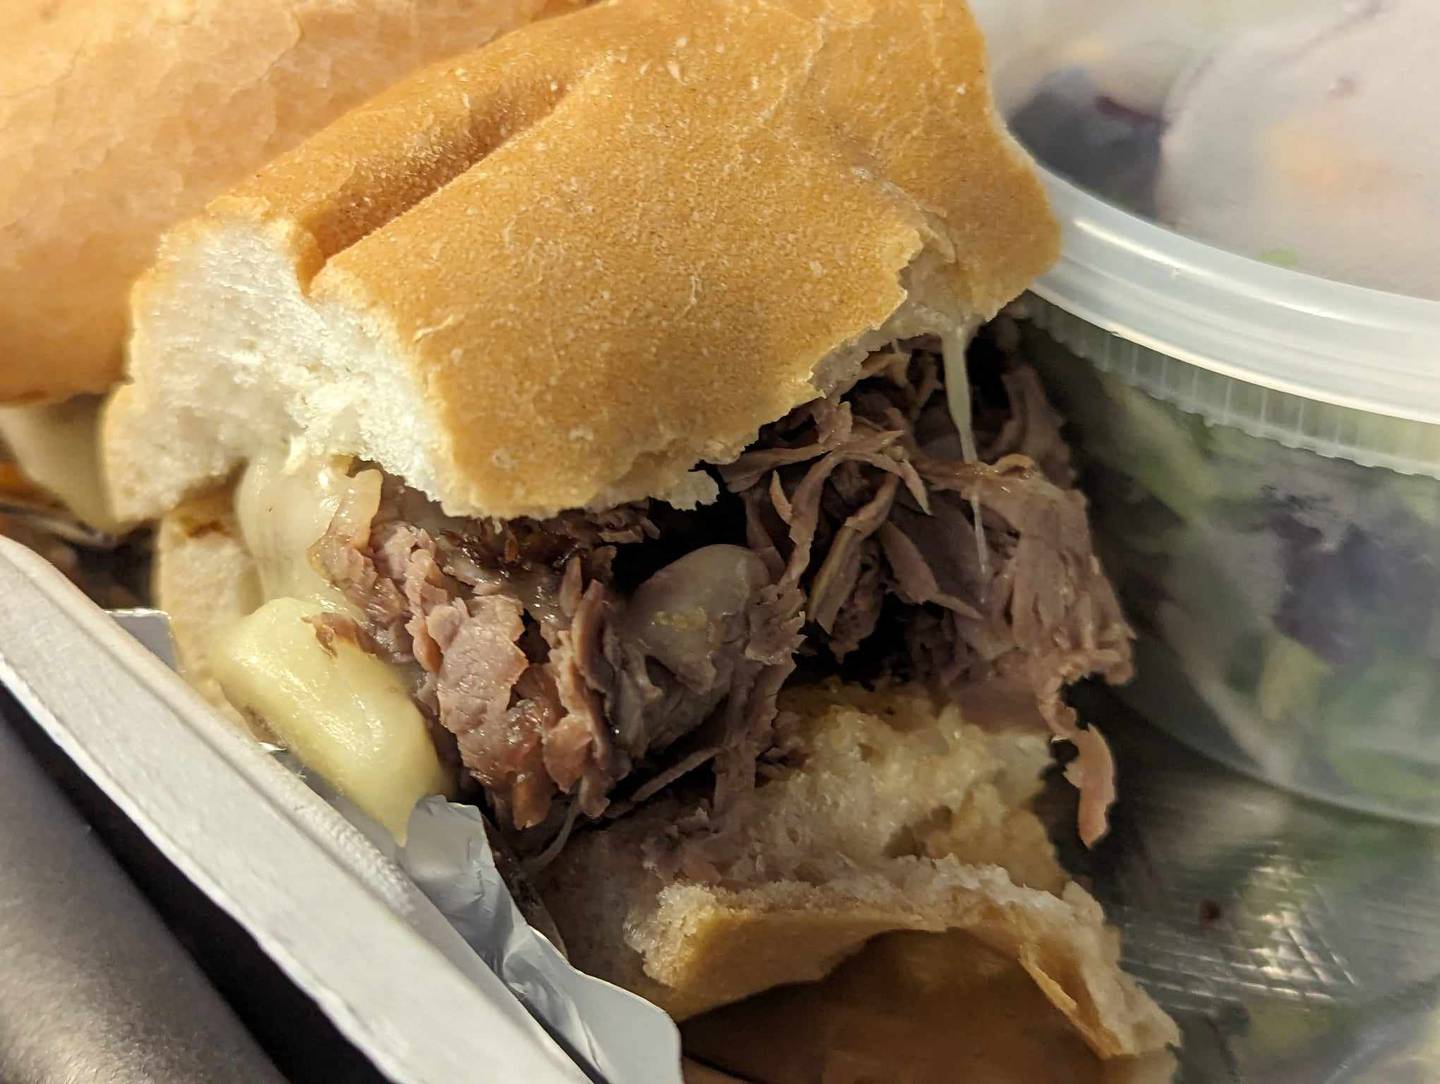 The cheese on Another Piece of Meat sandwich at Freedom Brothers Pizzeria and Alehouse in Plainfield was melted throughout the Italian beef instead of just on top.